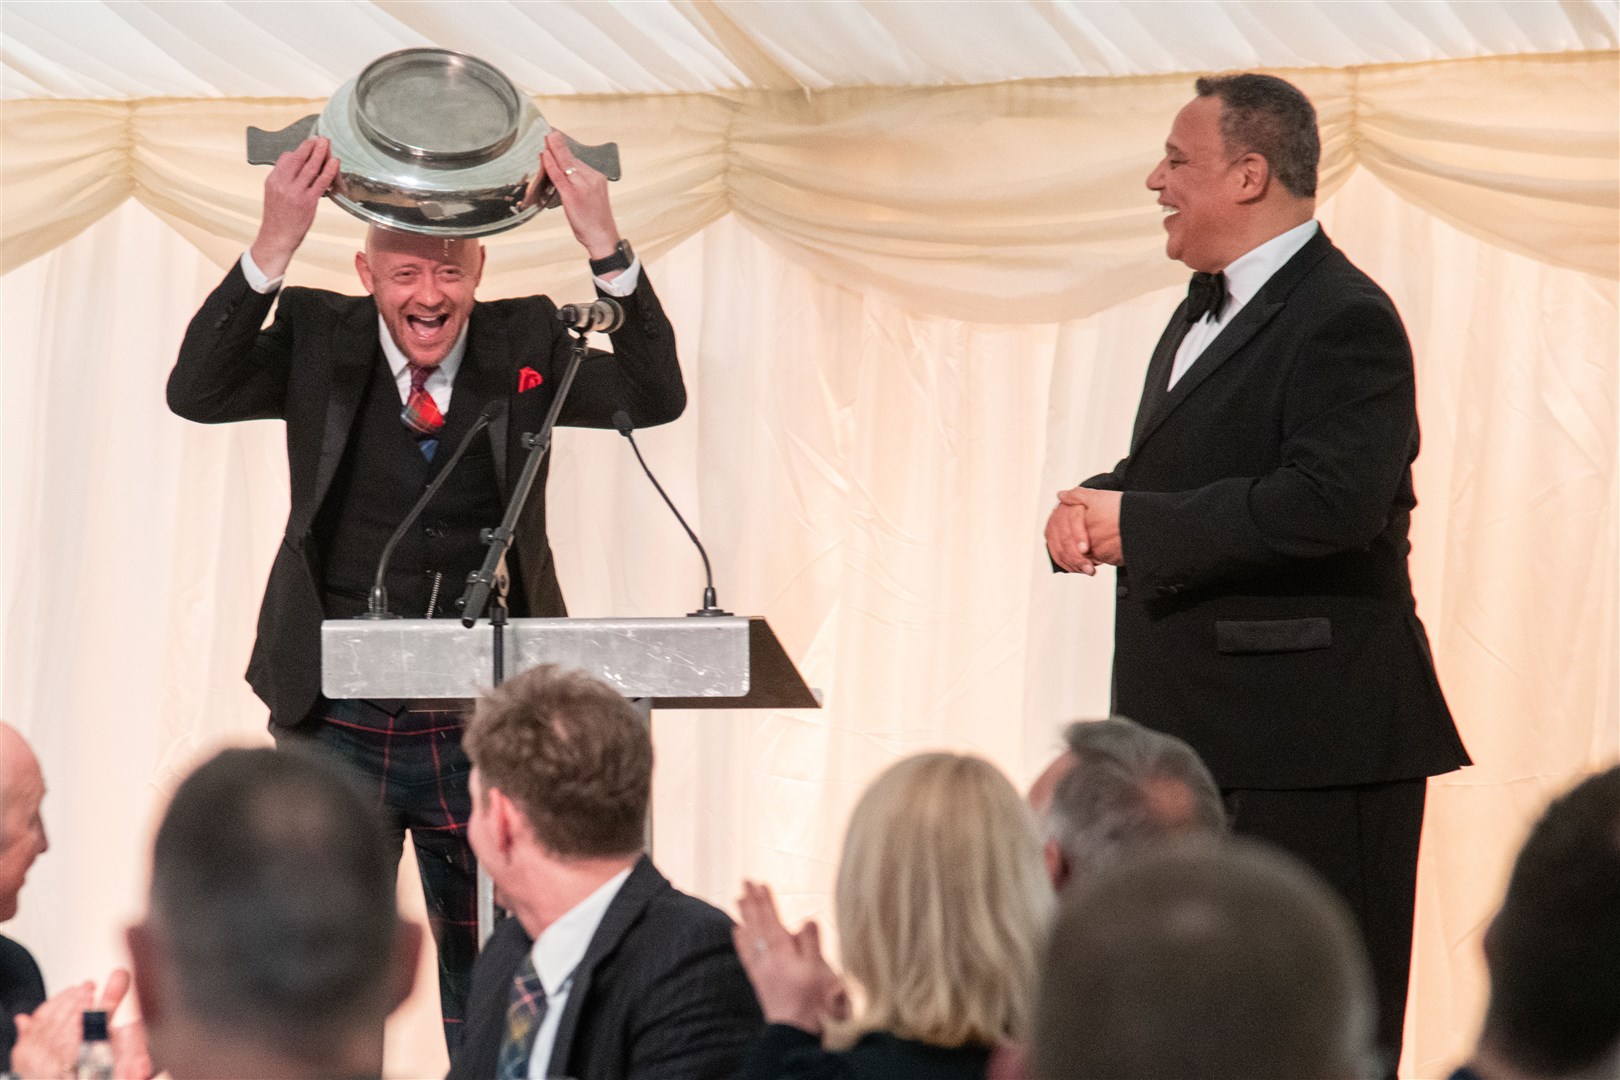 Festival chairman George McNeil drinks from the quaich to open the festival...2023 Spirit of Speyside Whisky Festival Opening Dinner, held at Dallas Dhu Distillery...Picture: Daniel Forsyth..